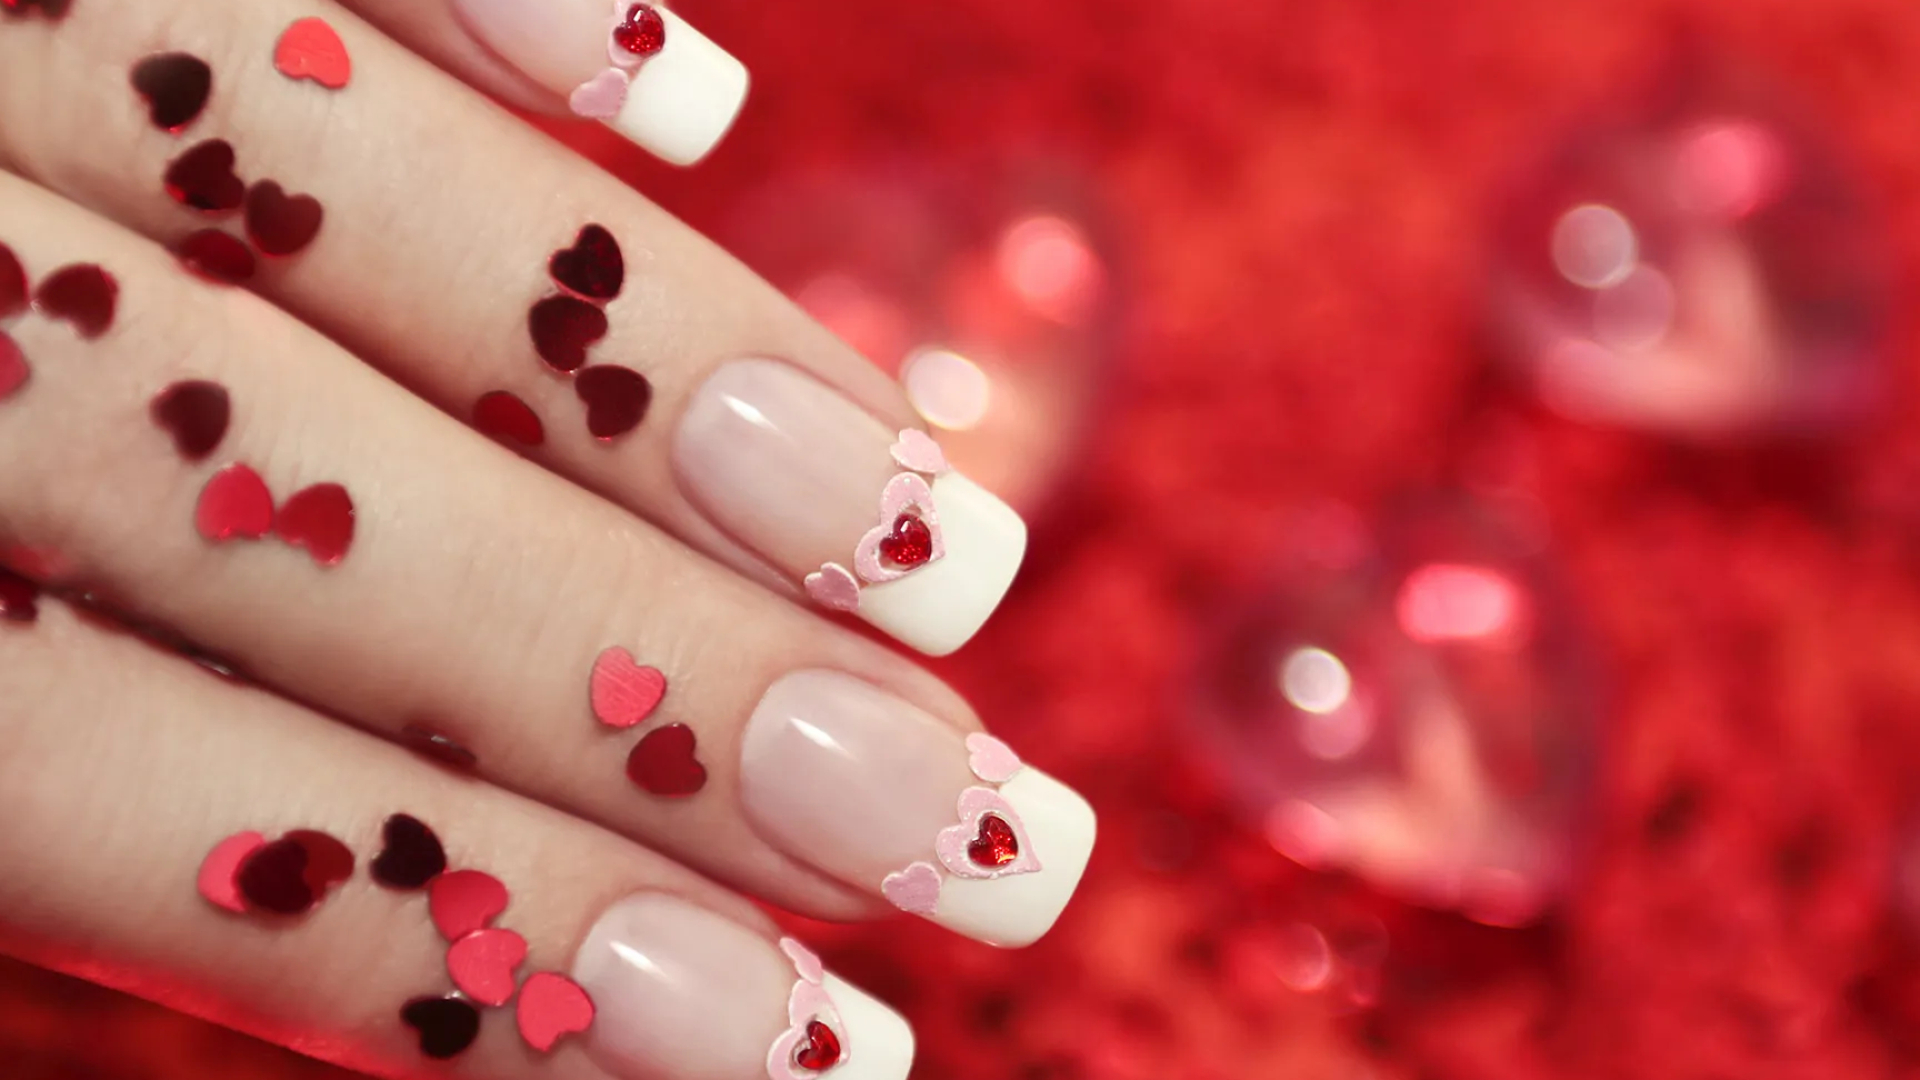 1920x1080 14 nail art designs that are perfect for Valentine's Day | Vogue India